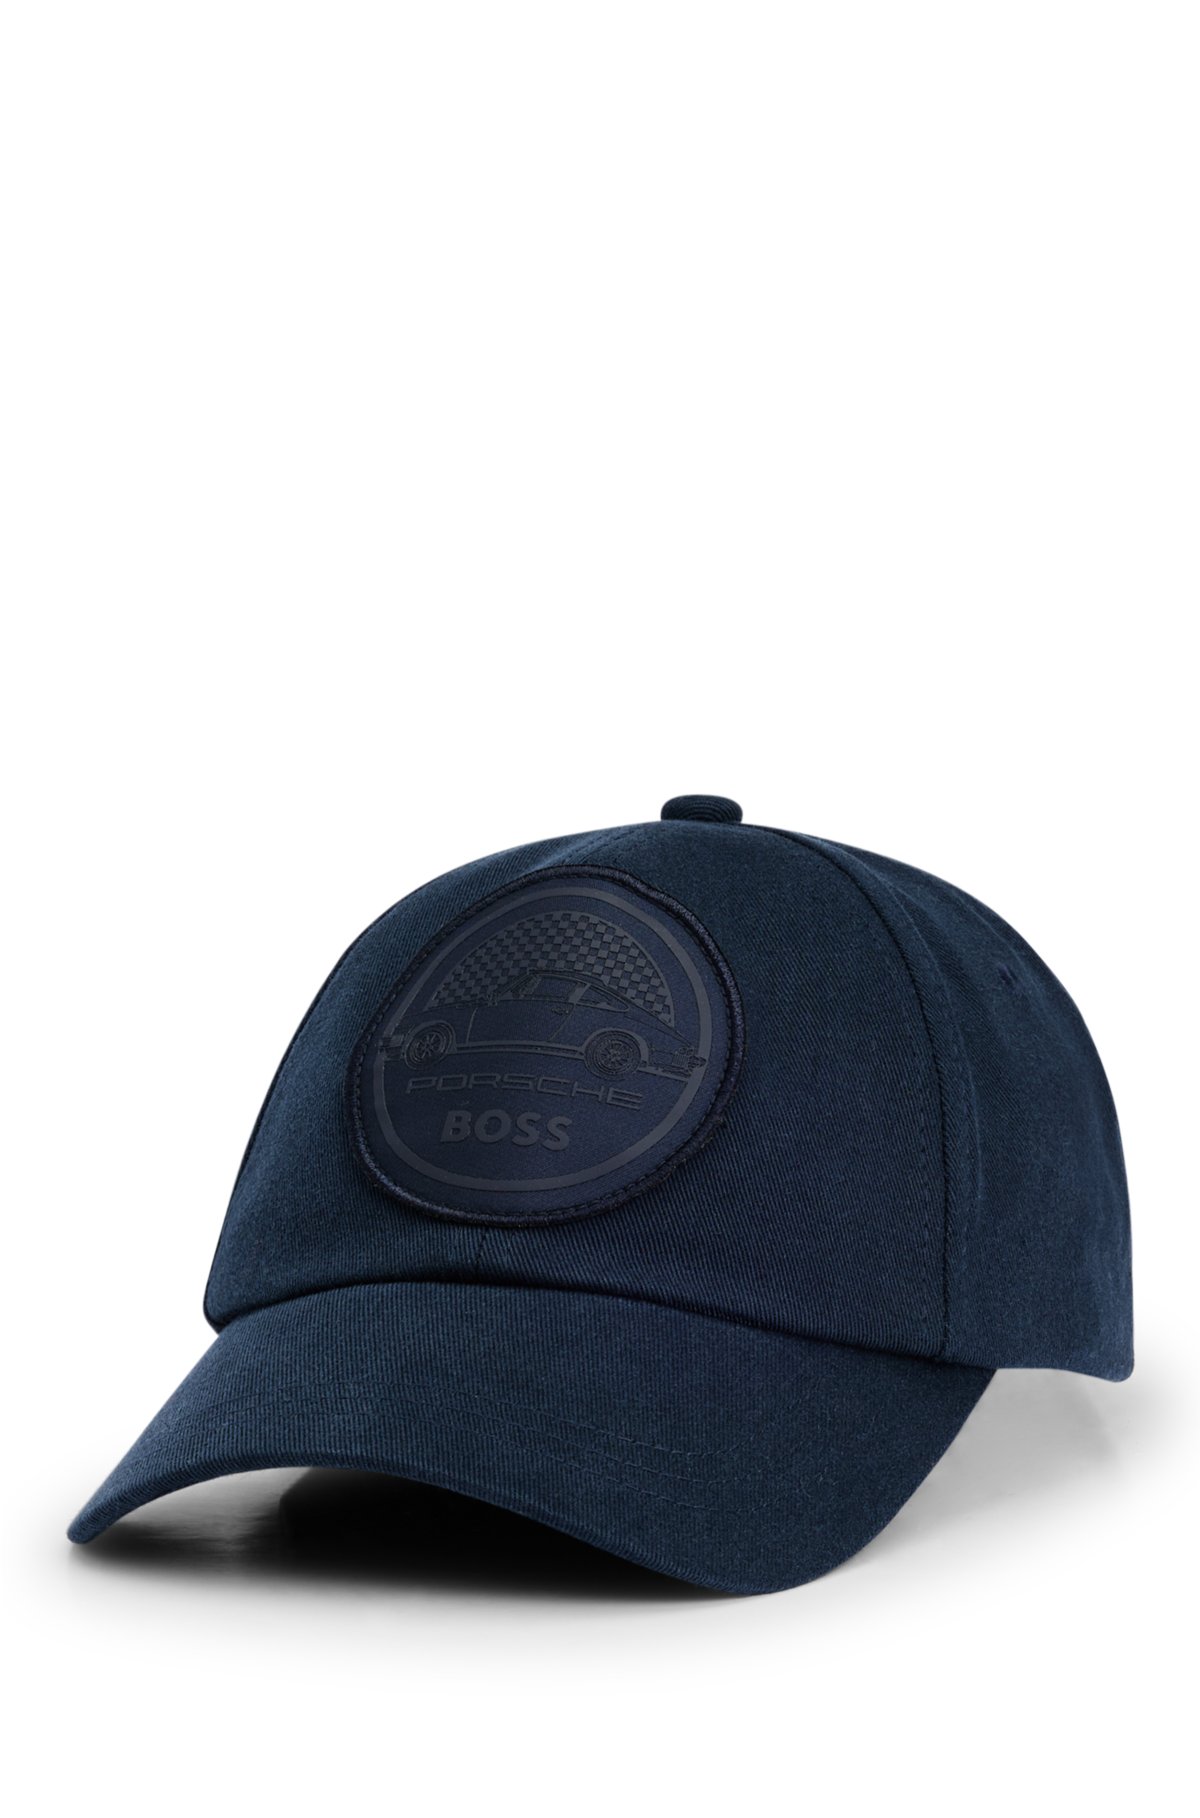 Porsche x Boss Cotton-Twill Cap with DUAL-BRANDED Patch 50509029 404